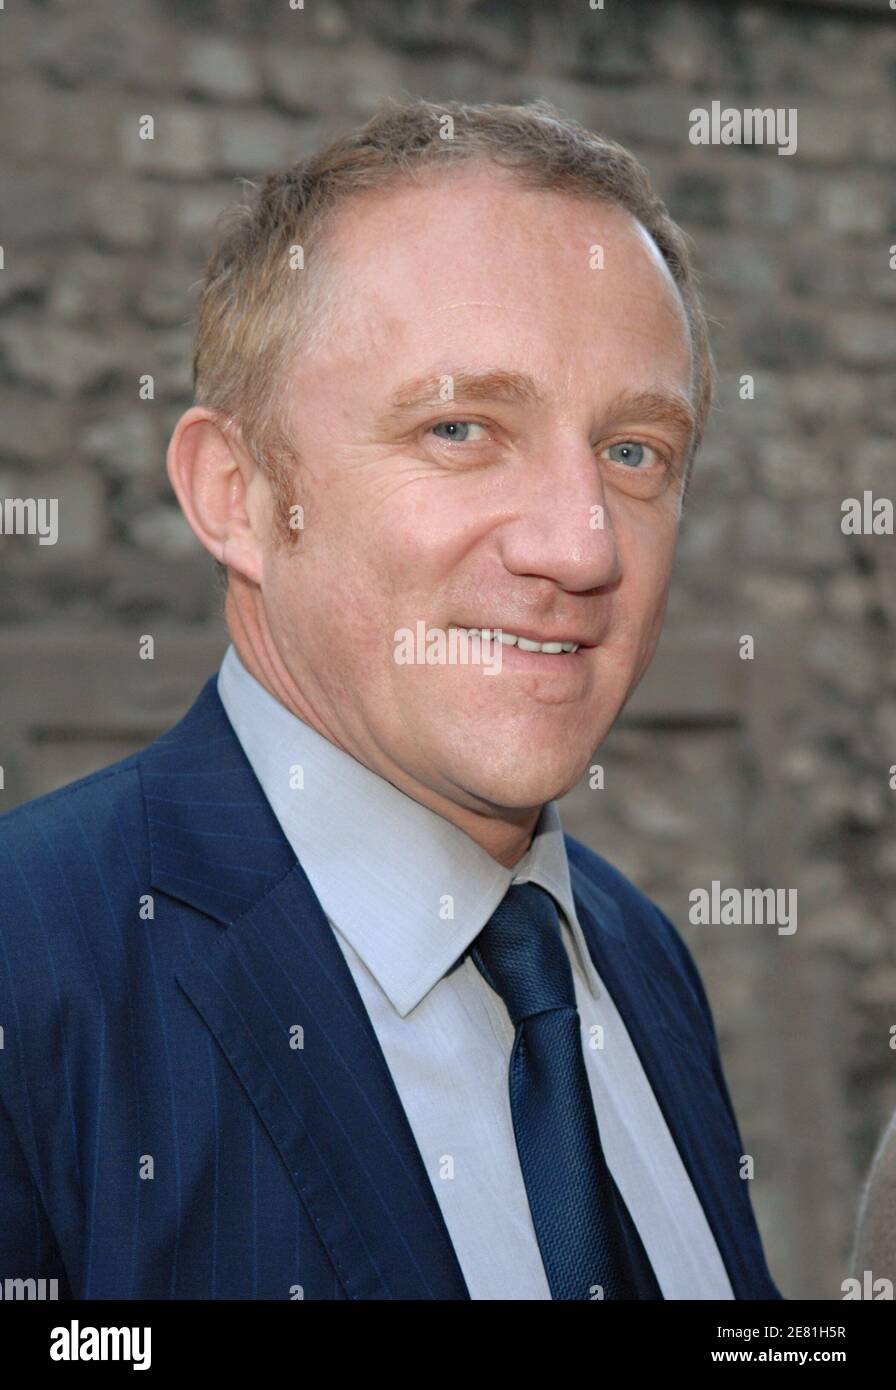 French luxury group Pinault-Printemps-Redoute's (PPR) chairman Francois-Henri Pinault poses for pictures during the launch party for La Redoute's new fashion collection presentation, held at the Couvent des Recollets, in Paris, France, on May 23, 2007. Photo by Nicolas Khayat/ABACAPRESS.COM Stock Photo